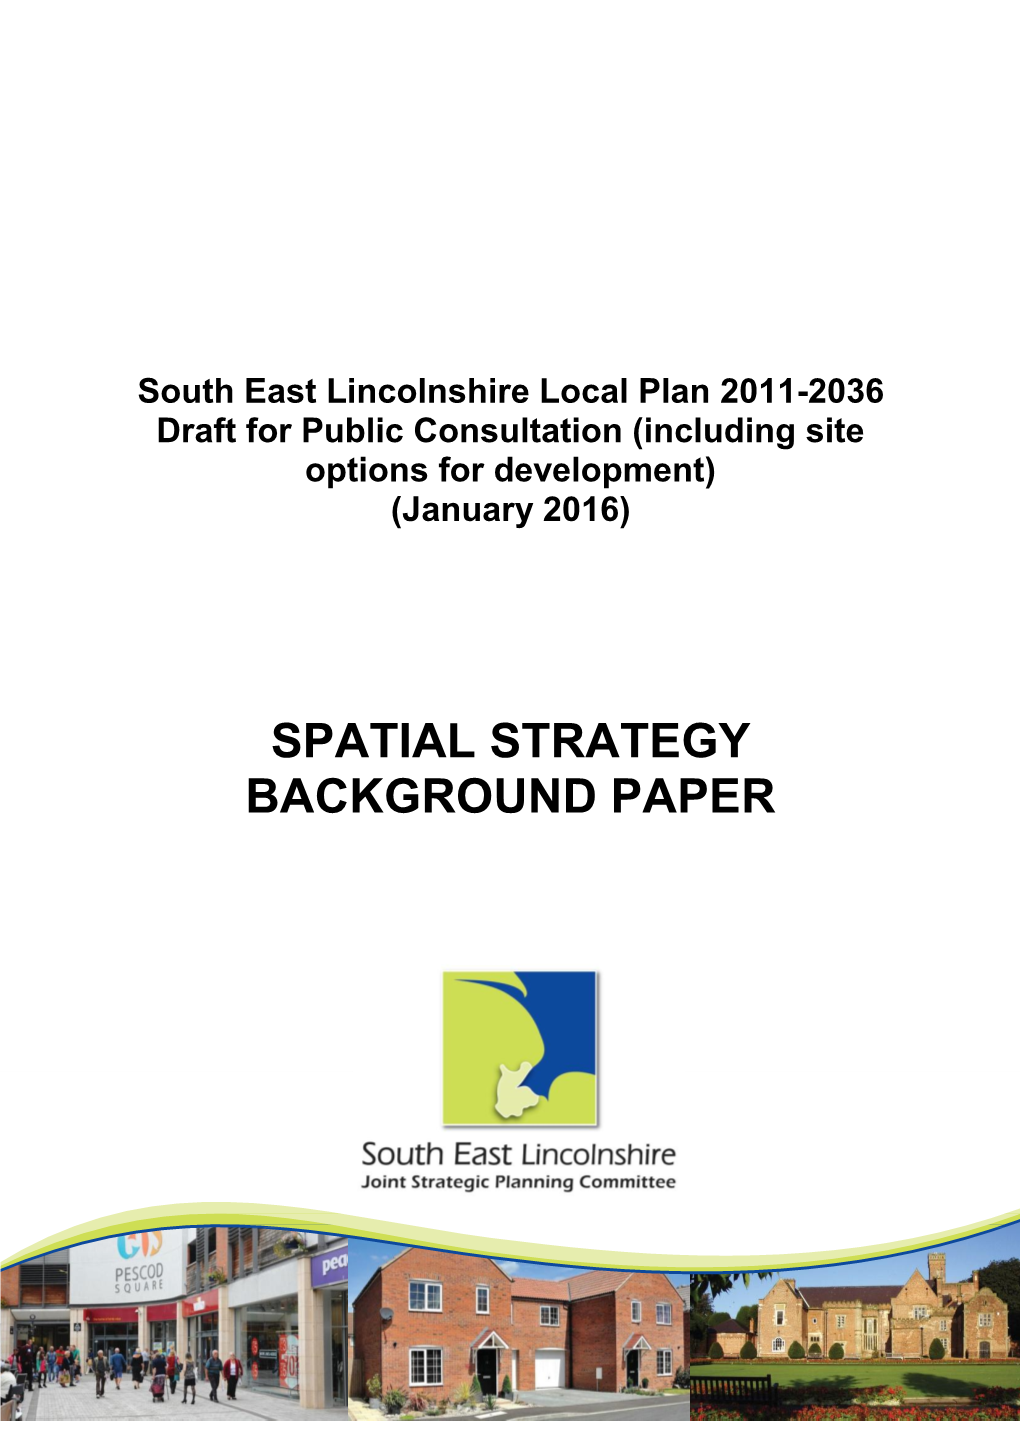 Spatial Strategy Background Paper